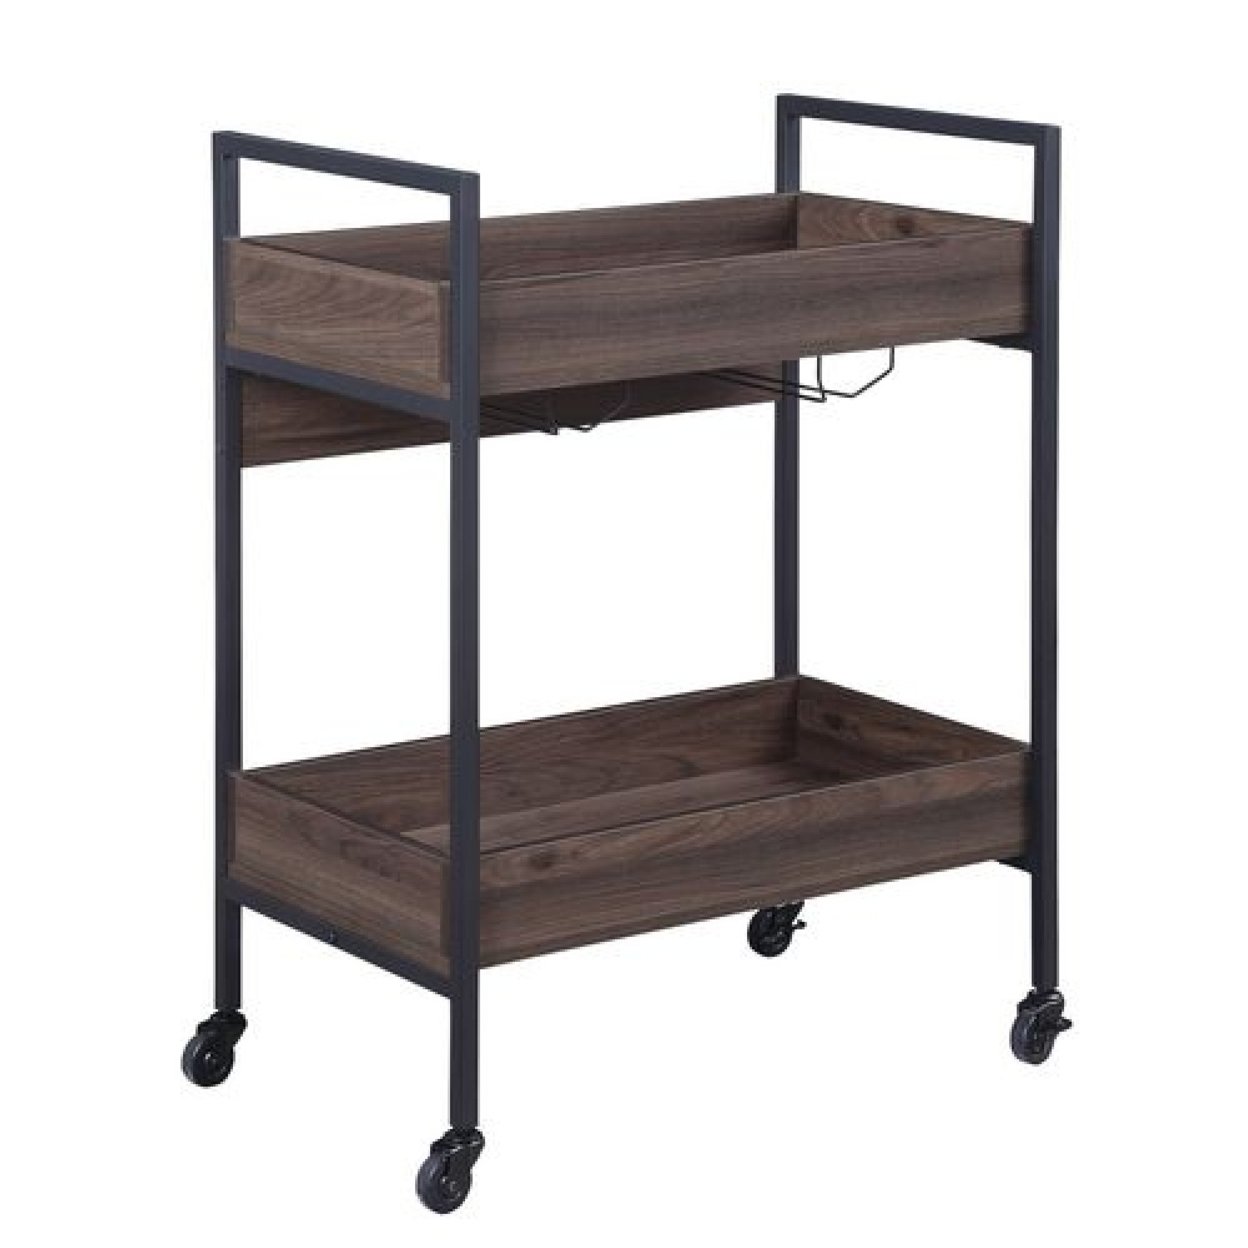 2 Tier Serving Cart With Wooden Shelves And Metal Frame, Brown- Saltoro Sherpi